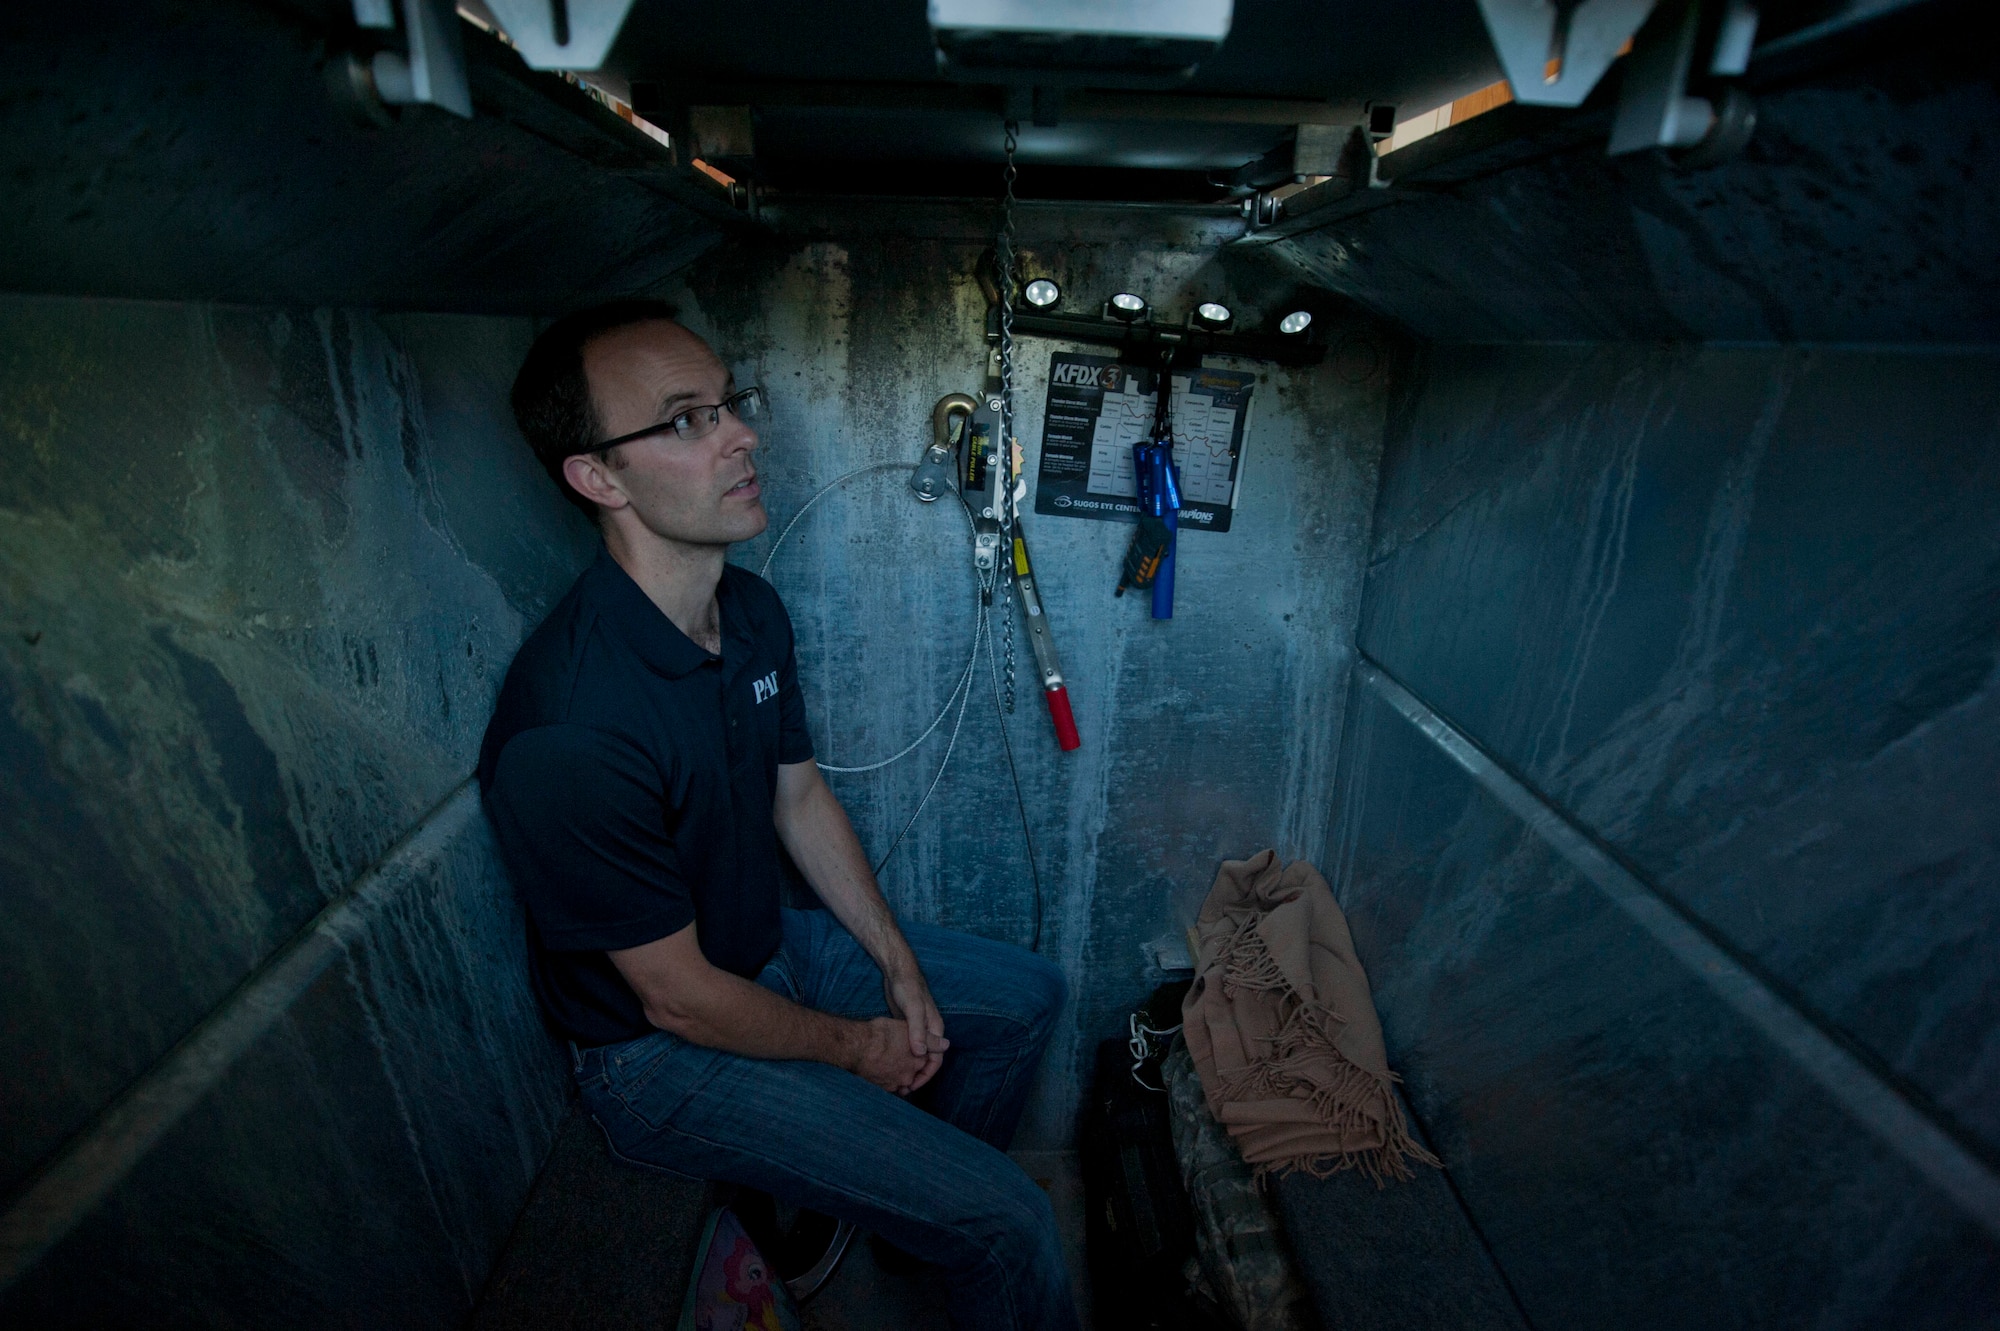 Jeremy Kirk, 82nd Civil Engineering Squadron emergency management specialist, sits down in the tornado shelter at his house April 23, 2014. Kirk helps the 82nd CES formulate escape and preparation plans for natural disasters. (U.S. Air Force photo by Airman 1st Class Jelani Gibson)